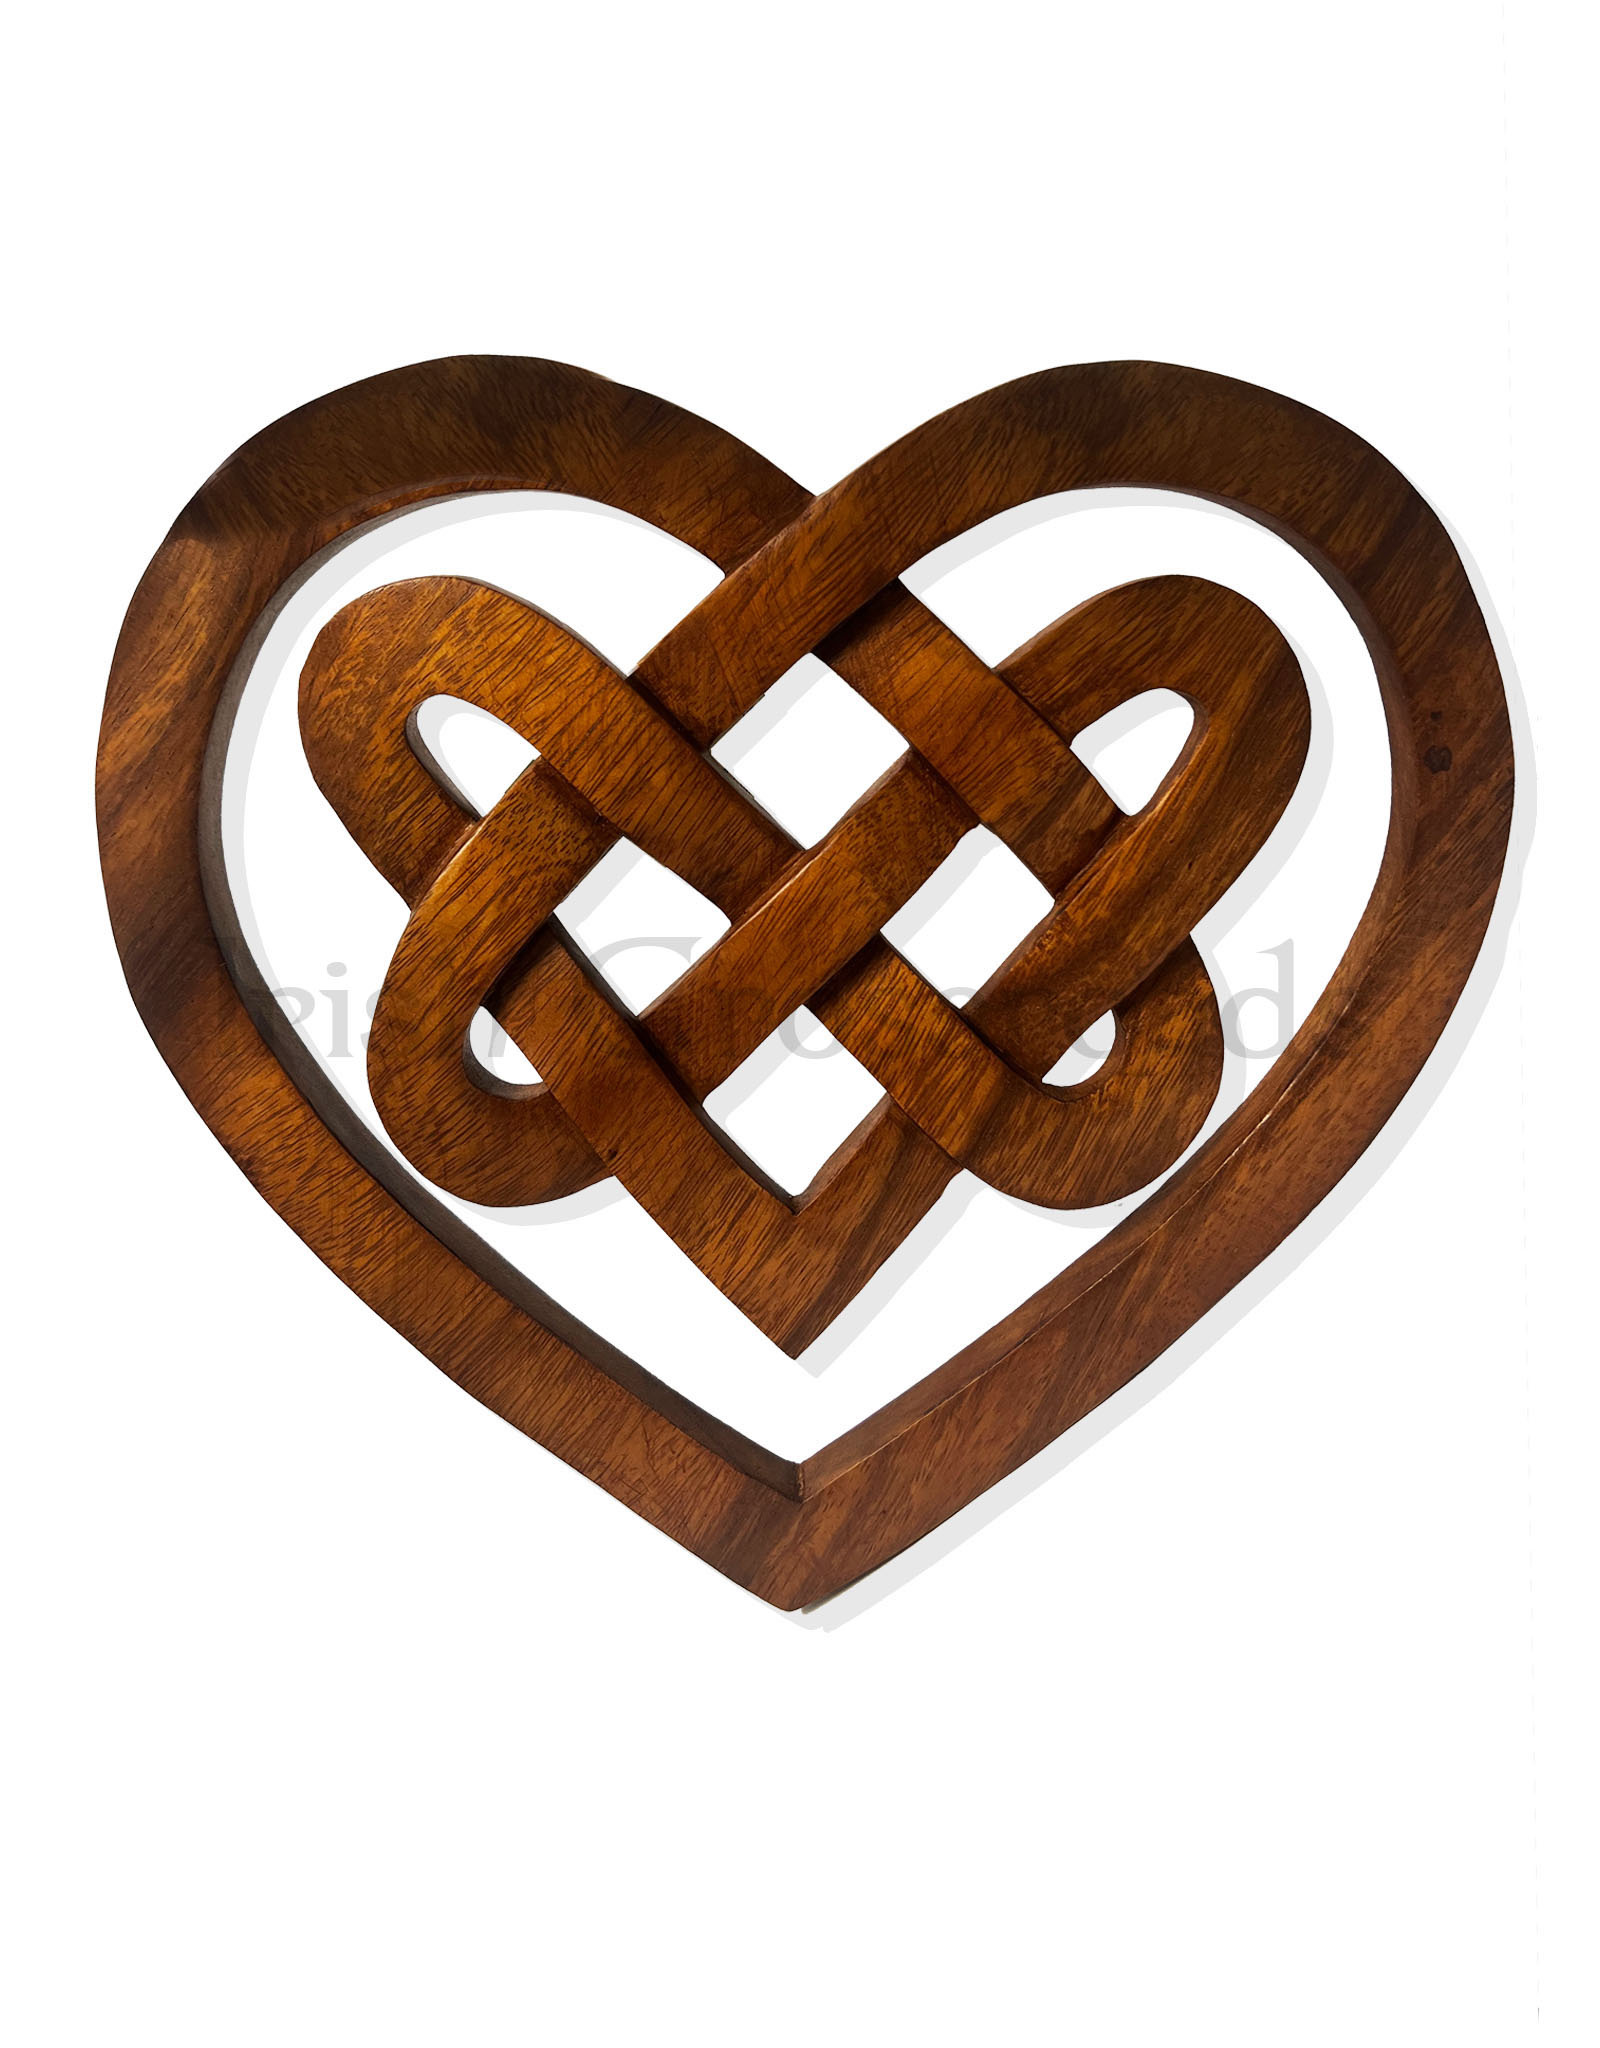 PLAQUES & GIFTS CELTIC WOOD CARVING - Trinity Heart